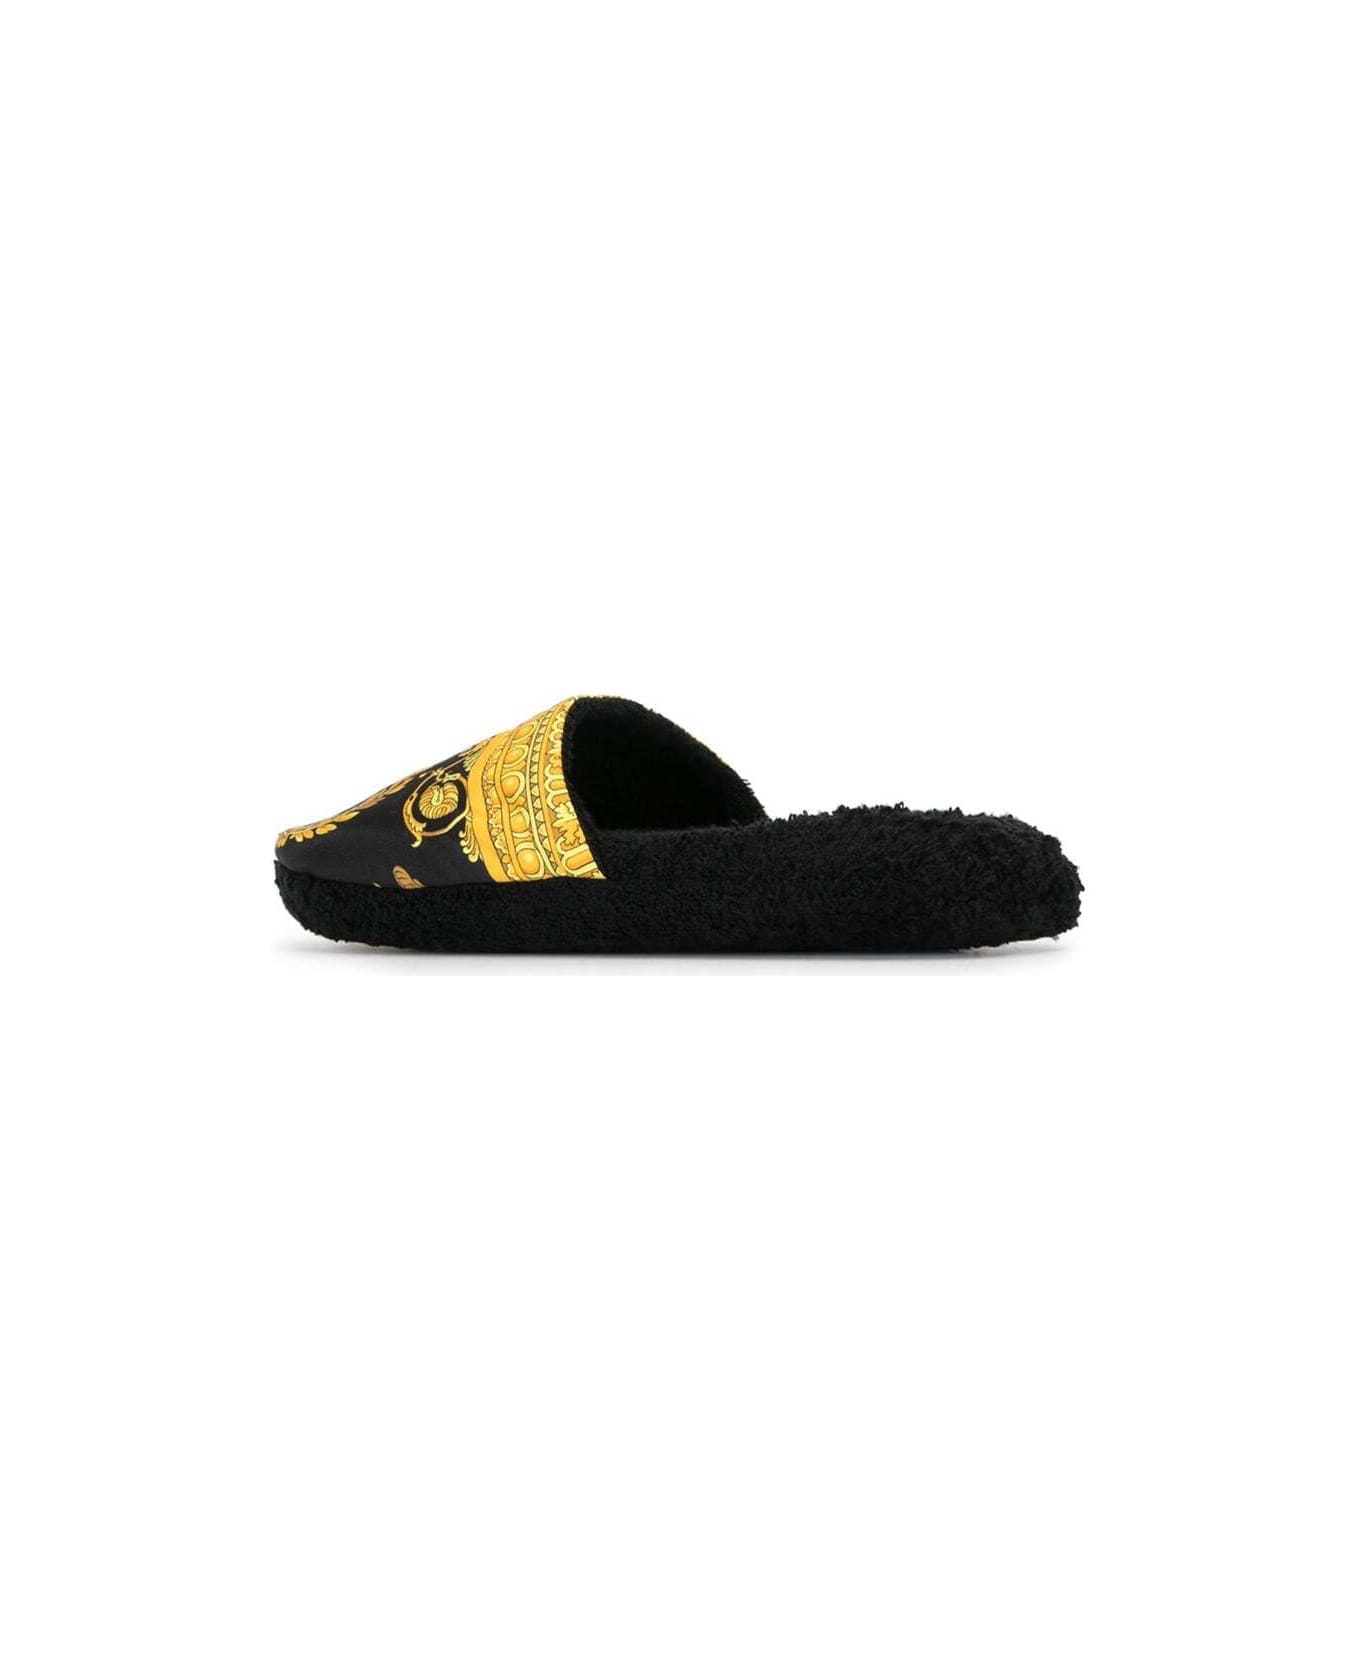 Versace Black And Gold House Slippers In Cotton And Terry With Baroque Print - Black